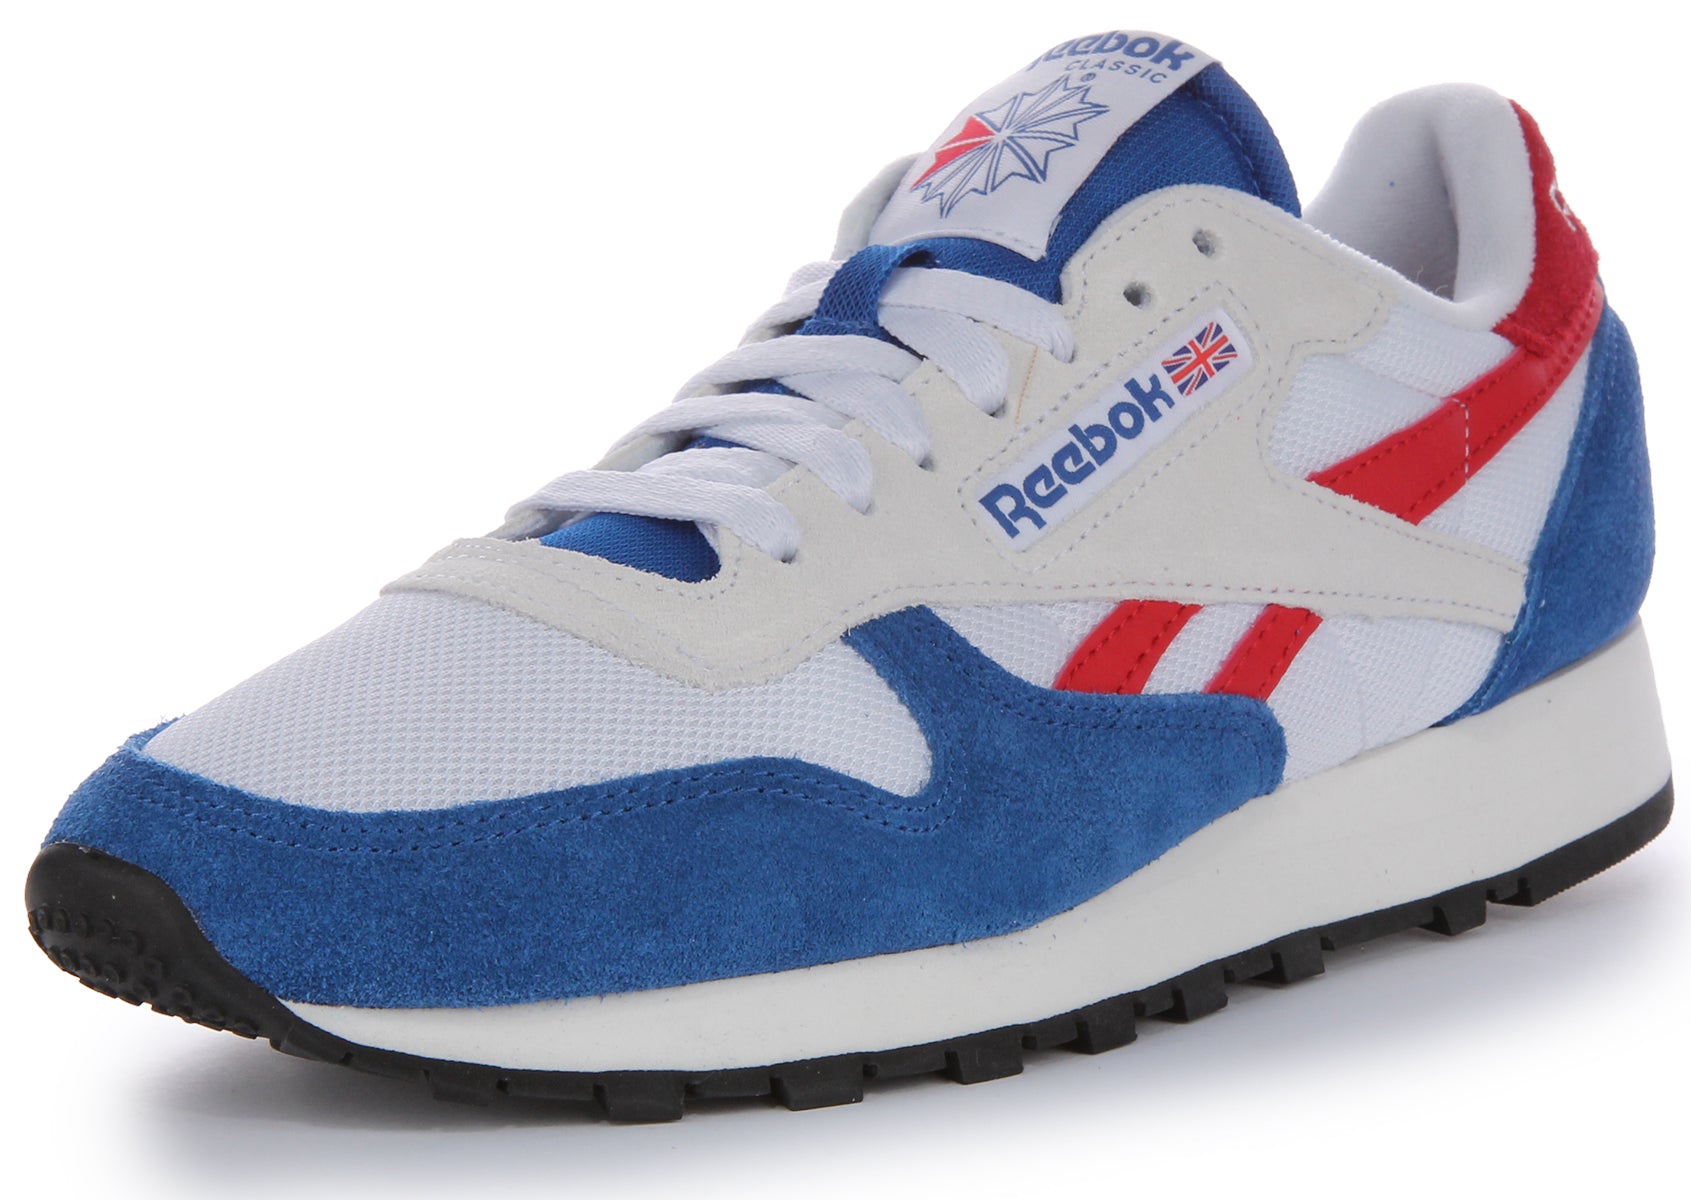 Reebok Classic - Blue Suede, Gum Bottom | Reebok classic, Adidas shoes  outlet, Reebok classic leather